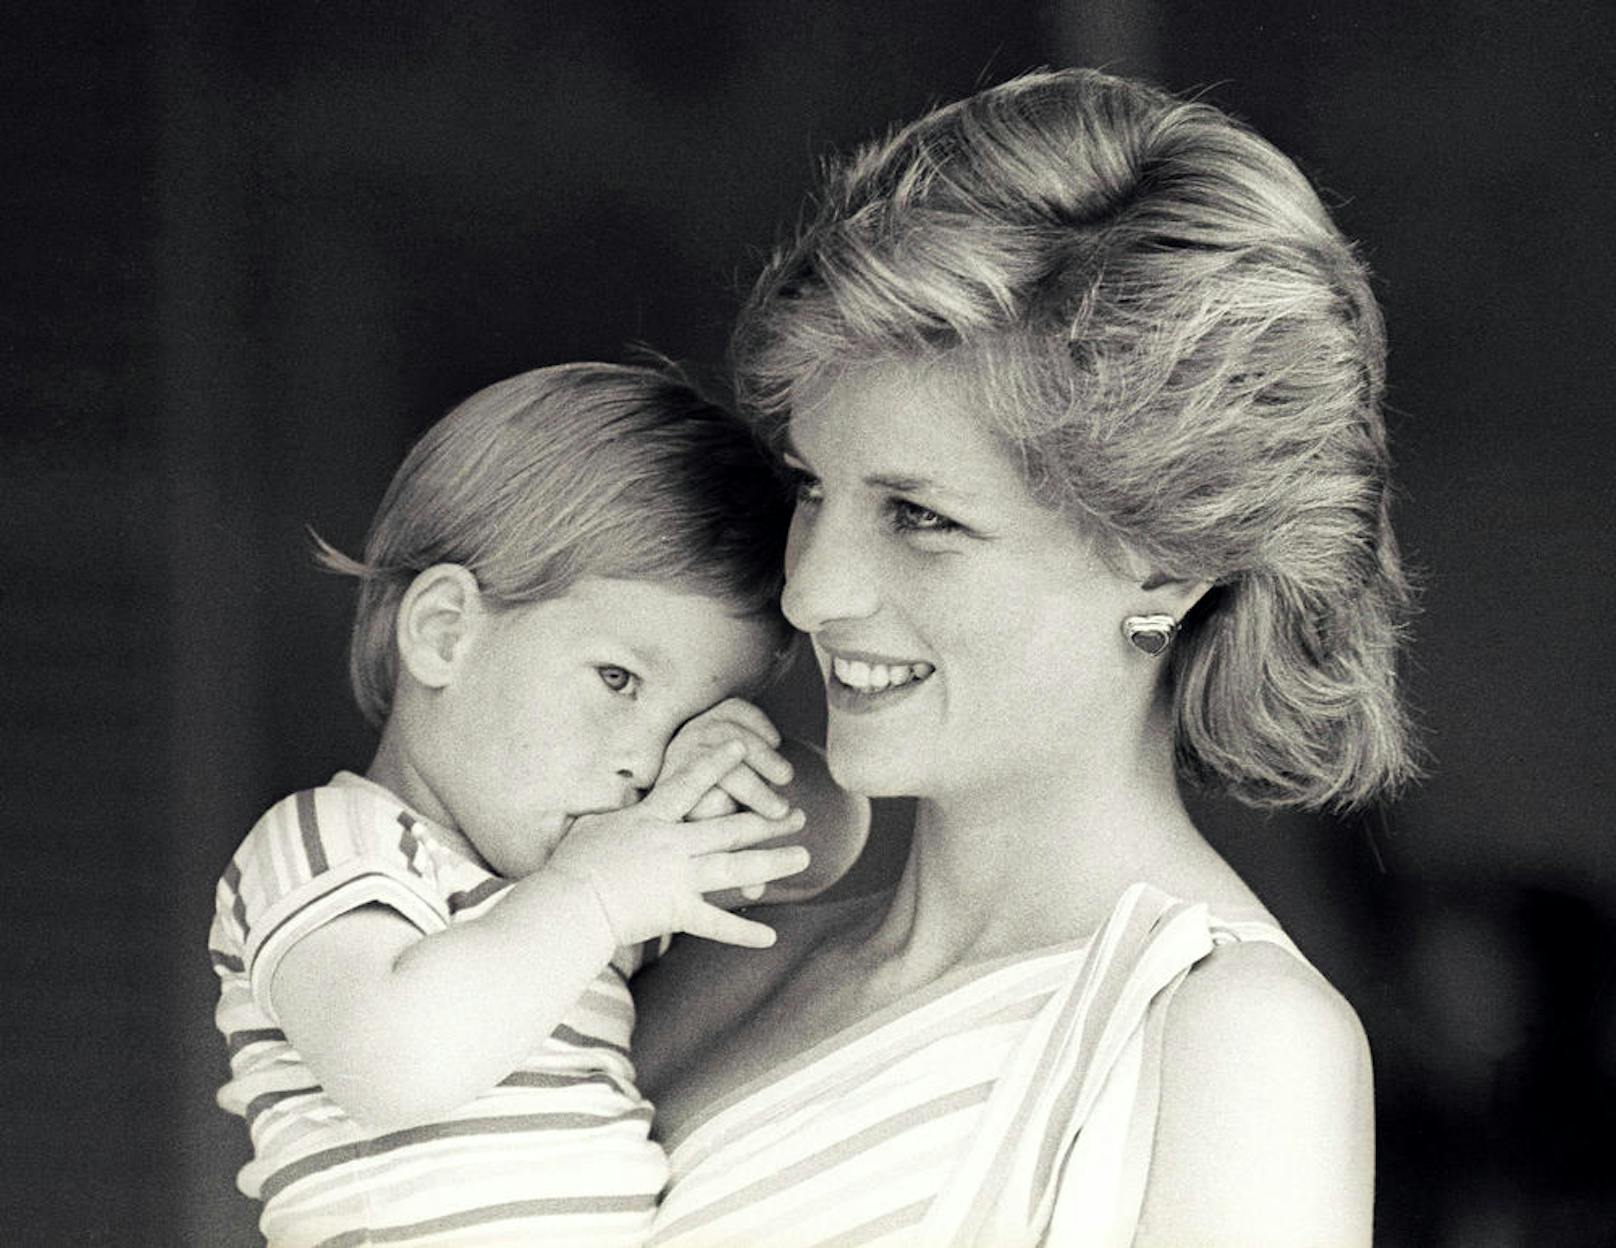 Prinzessin Diana starb am 31. August 1997